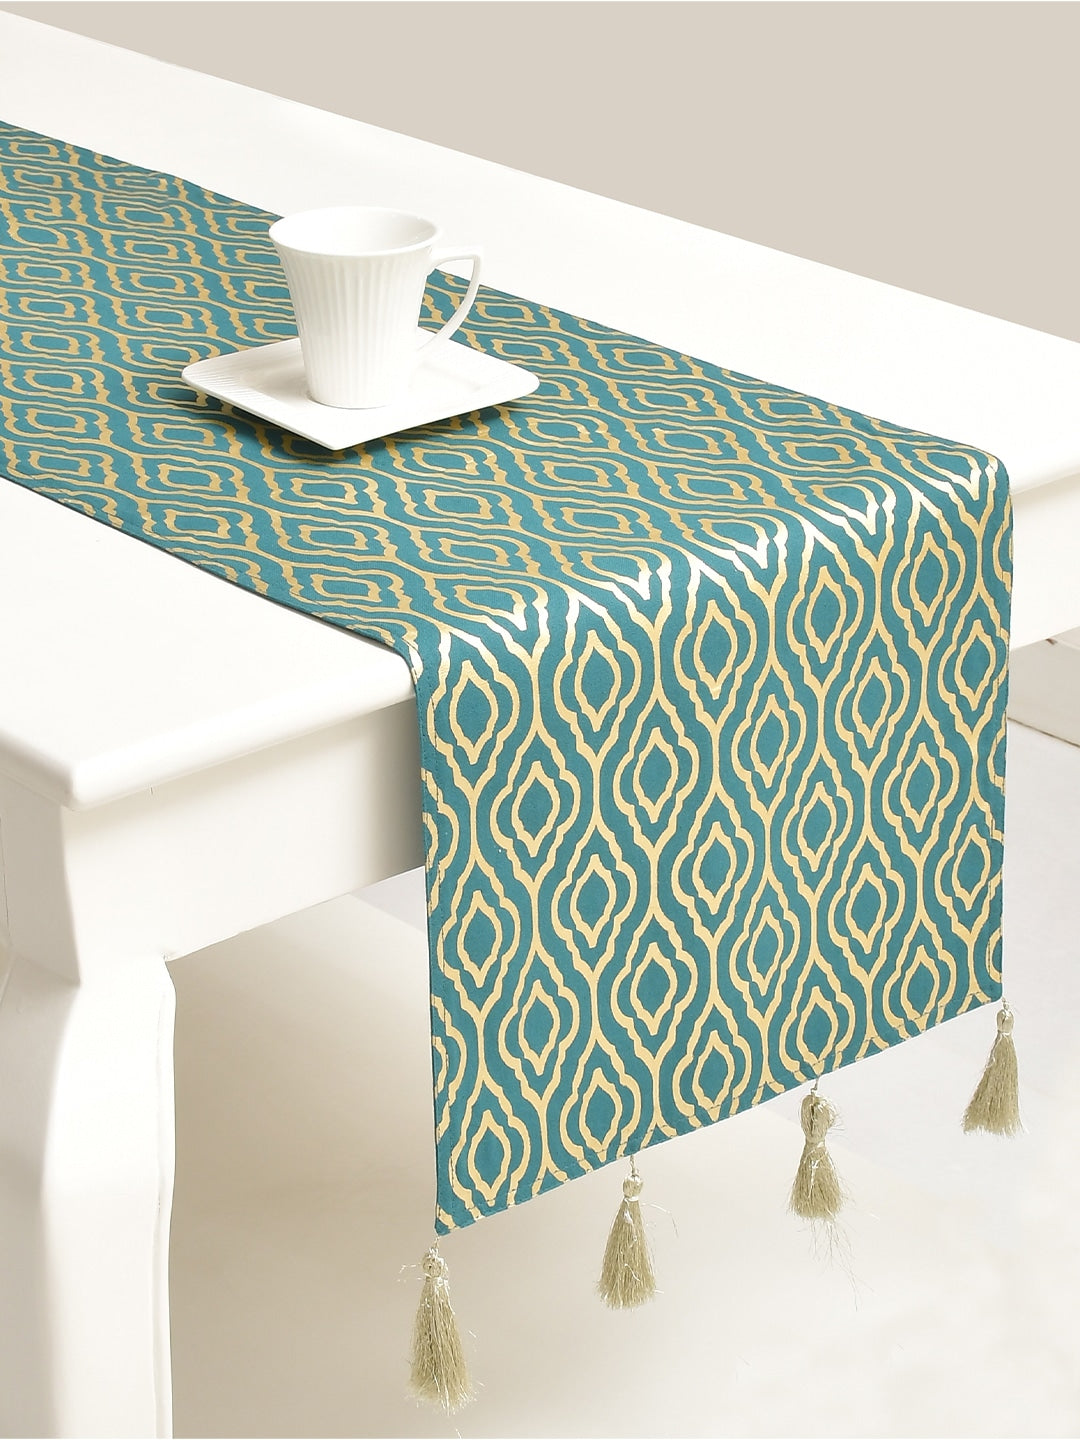 Blanc9 Roshan Teal Colored 100% Cotton Printed 4/6 Seater Table Runner